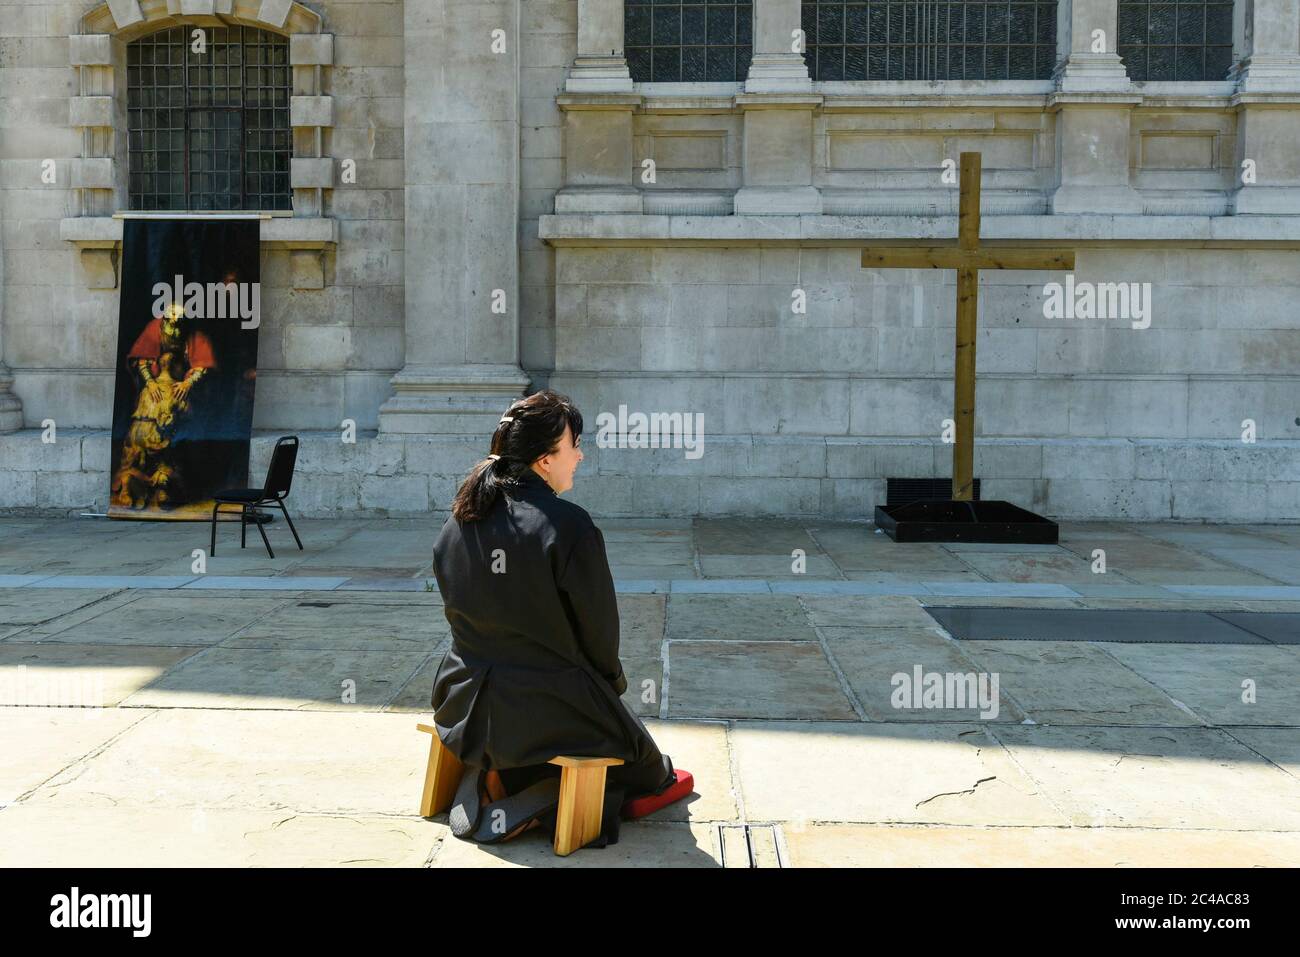 London, UK.  25 June 2020.  Sally, a priest of the church, kneels in the new outdoor Prayer Garden in the courtyard of St Martin-in-the-Fields, Trafalgar Square, where all are welcome to meditate, pray and discover peace and stillness at the heart of London.  The UK government has relaxed coronavirus pandemic lockdown restrictions allowing communal prayer from 4 July. Currently, many churches are offering online services to their congregations. Credit: Stephen Chung / Alamy Live News Stock Photo